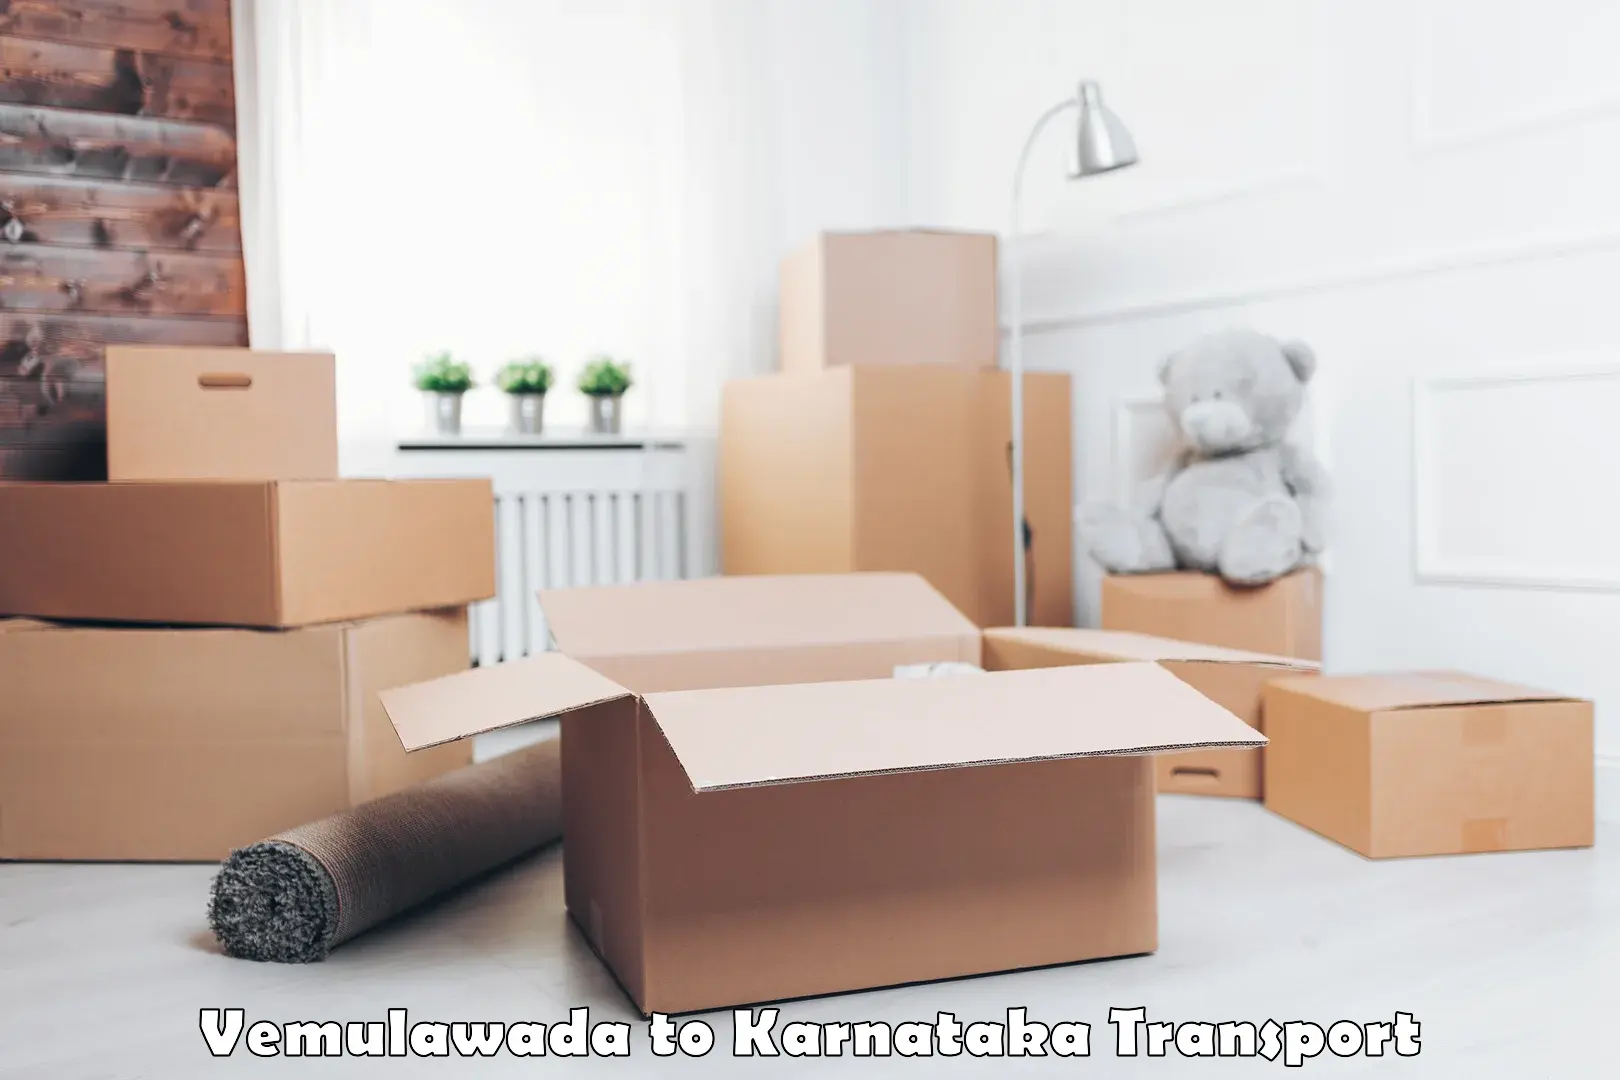 Parcel transport services Vemulawada to Chittapur